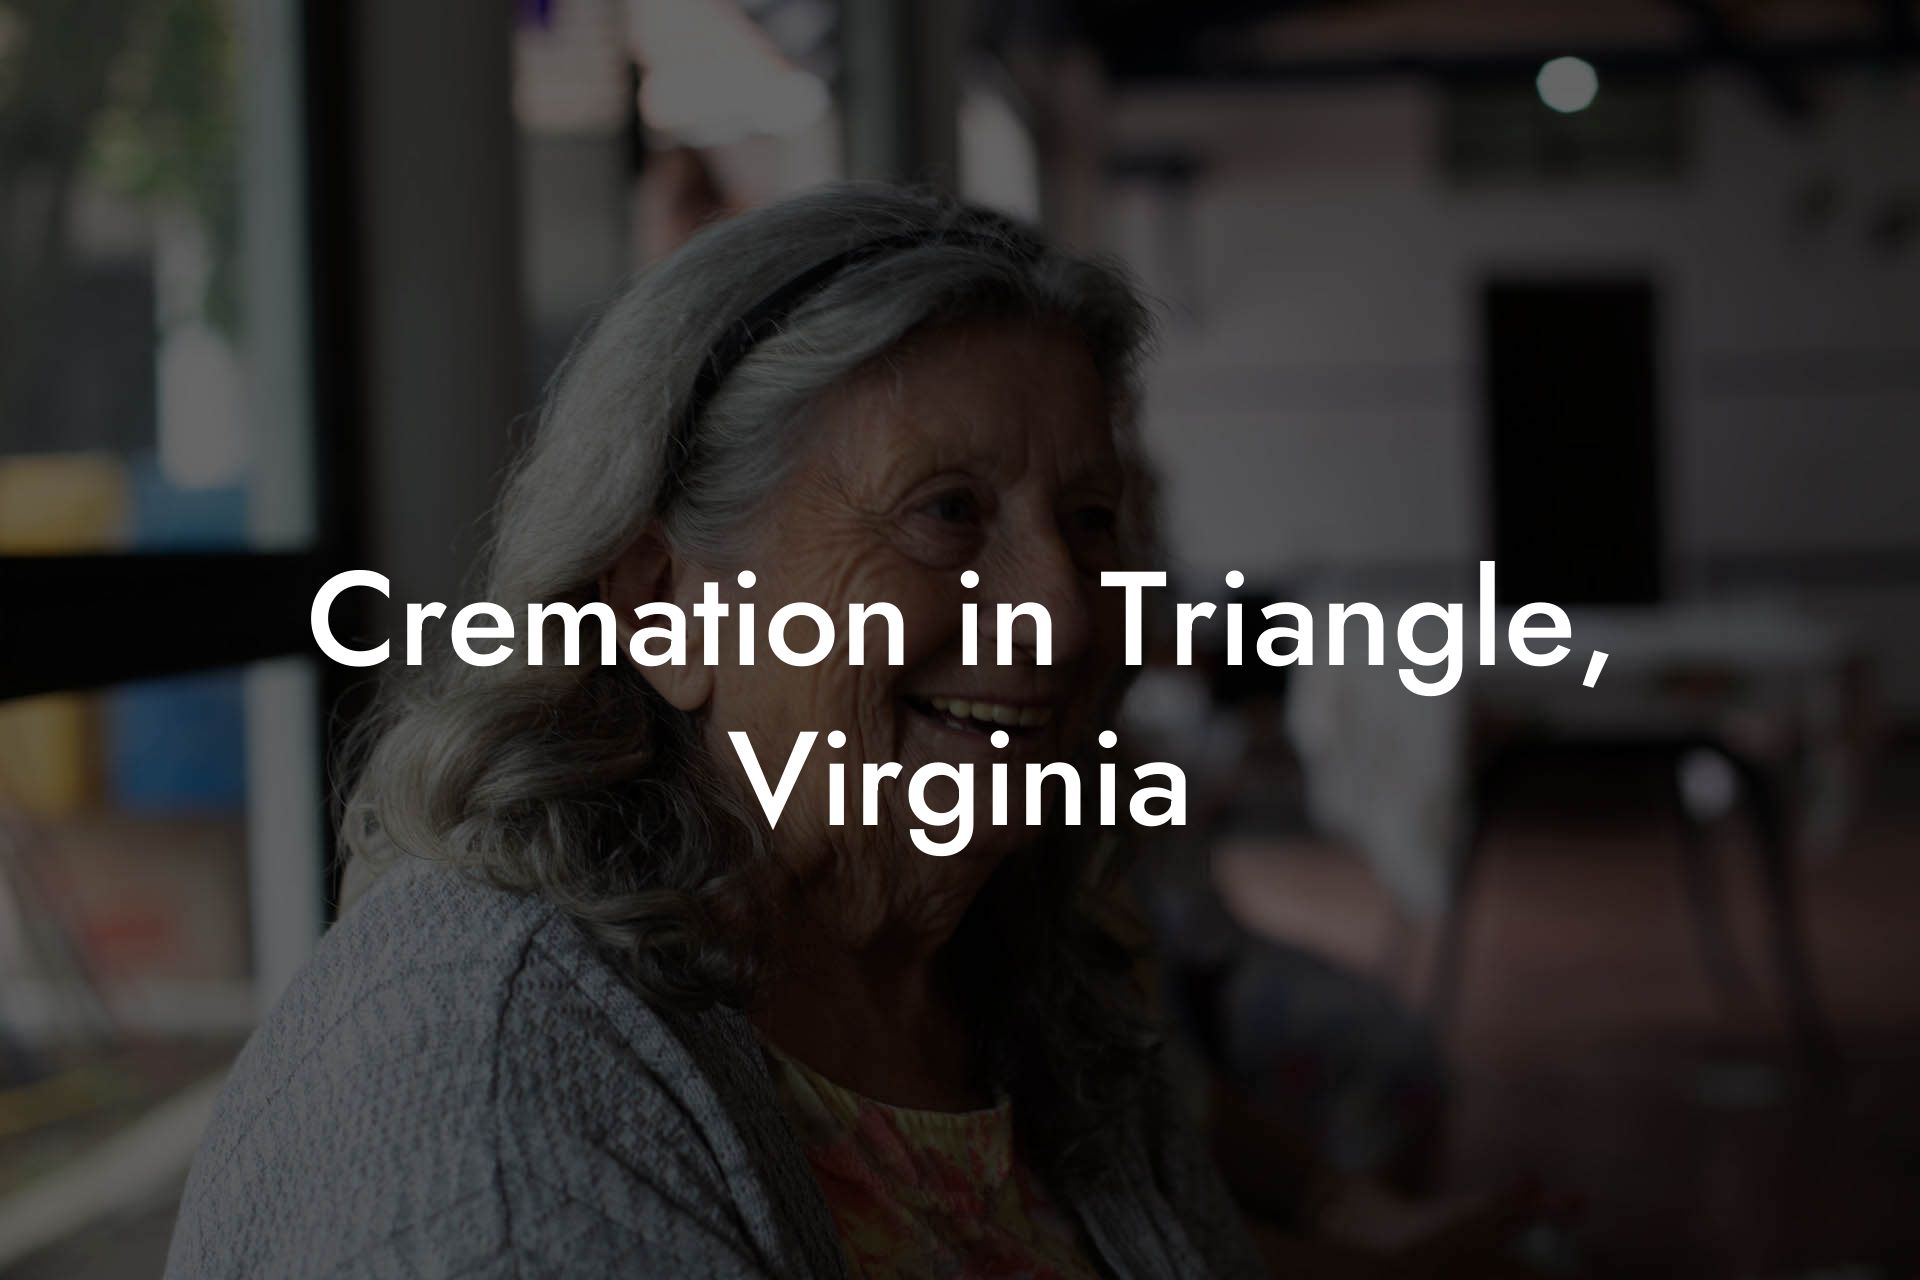 Cremation in Triangle, Virginia